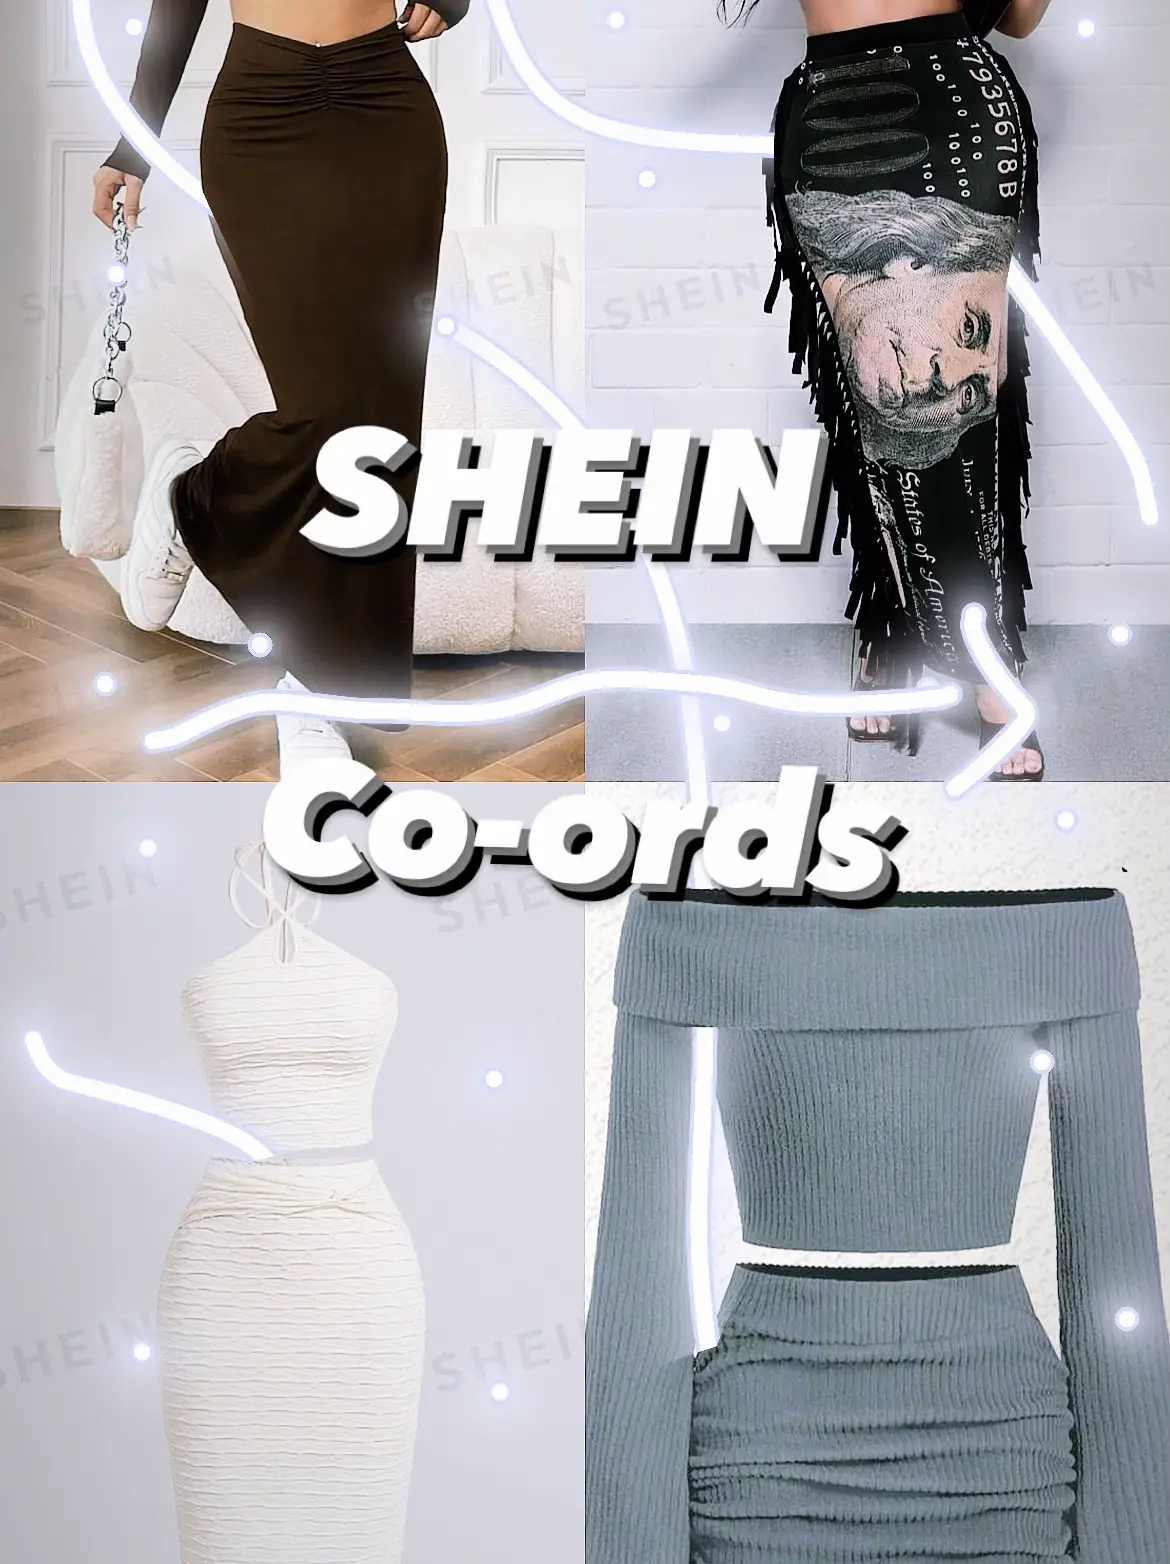 SHEIN CURVE - It already feels like spring has arrived in this